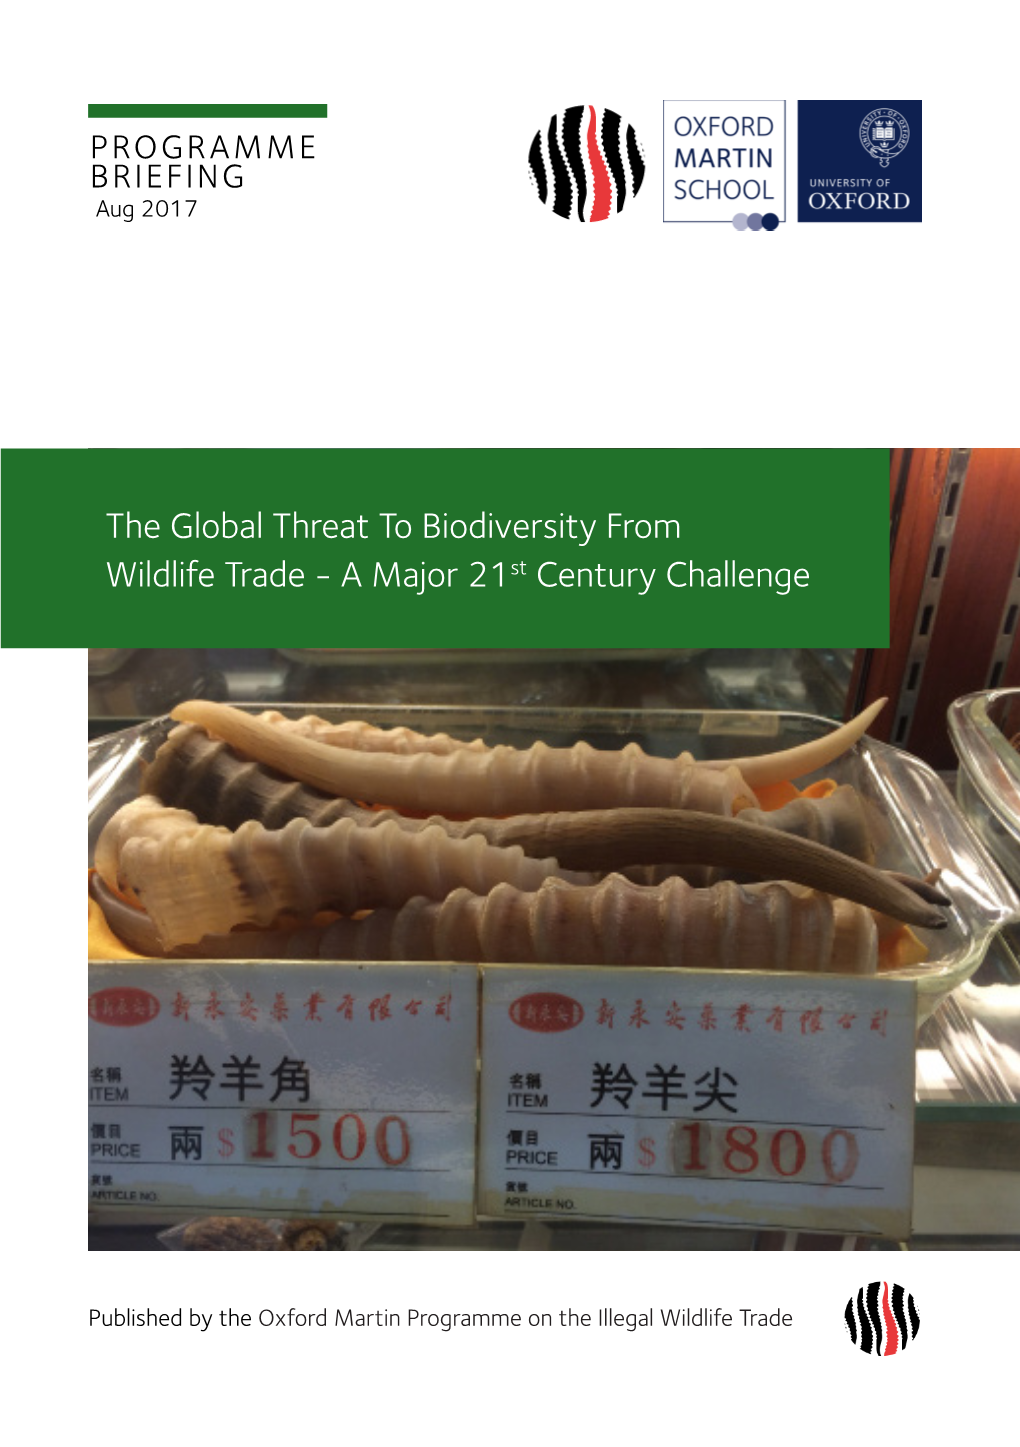 The Global Threat to Biodiversity from Wildlife Trade - a Major 21St Century Challenge